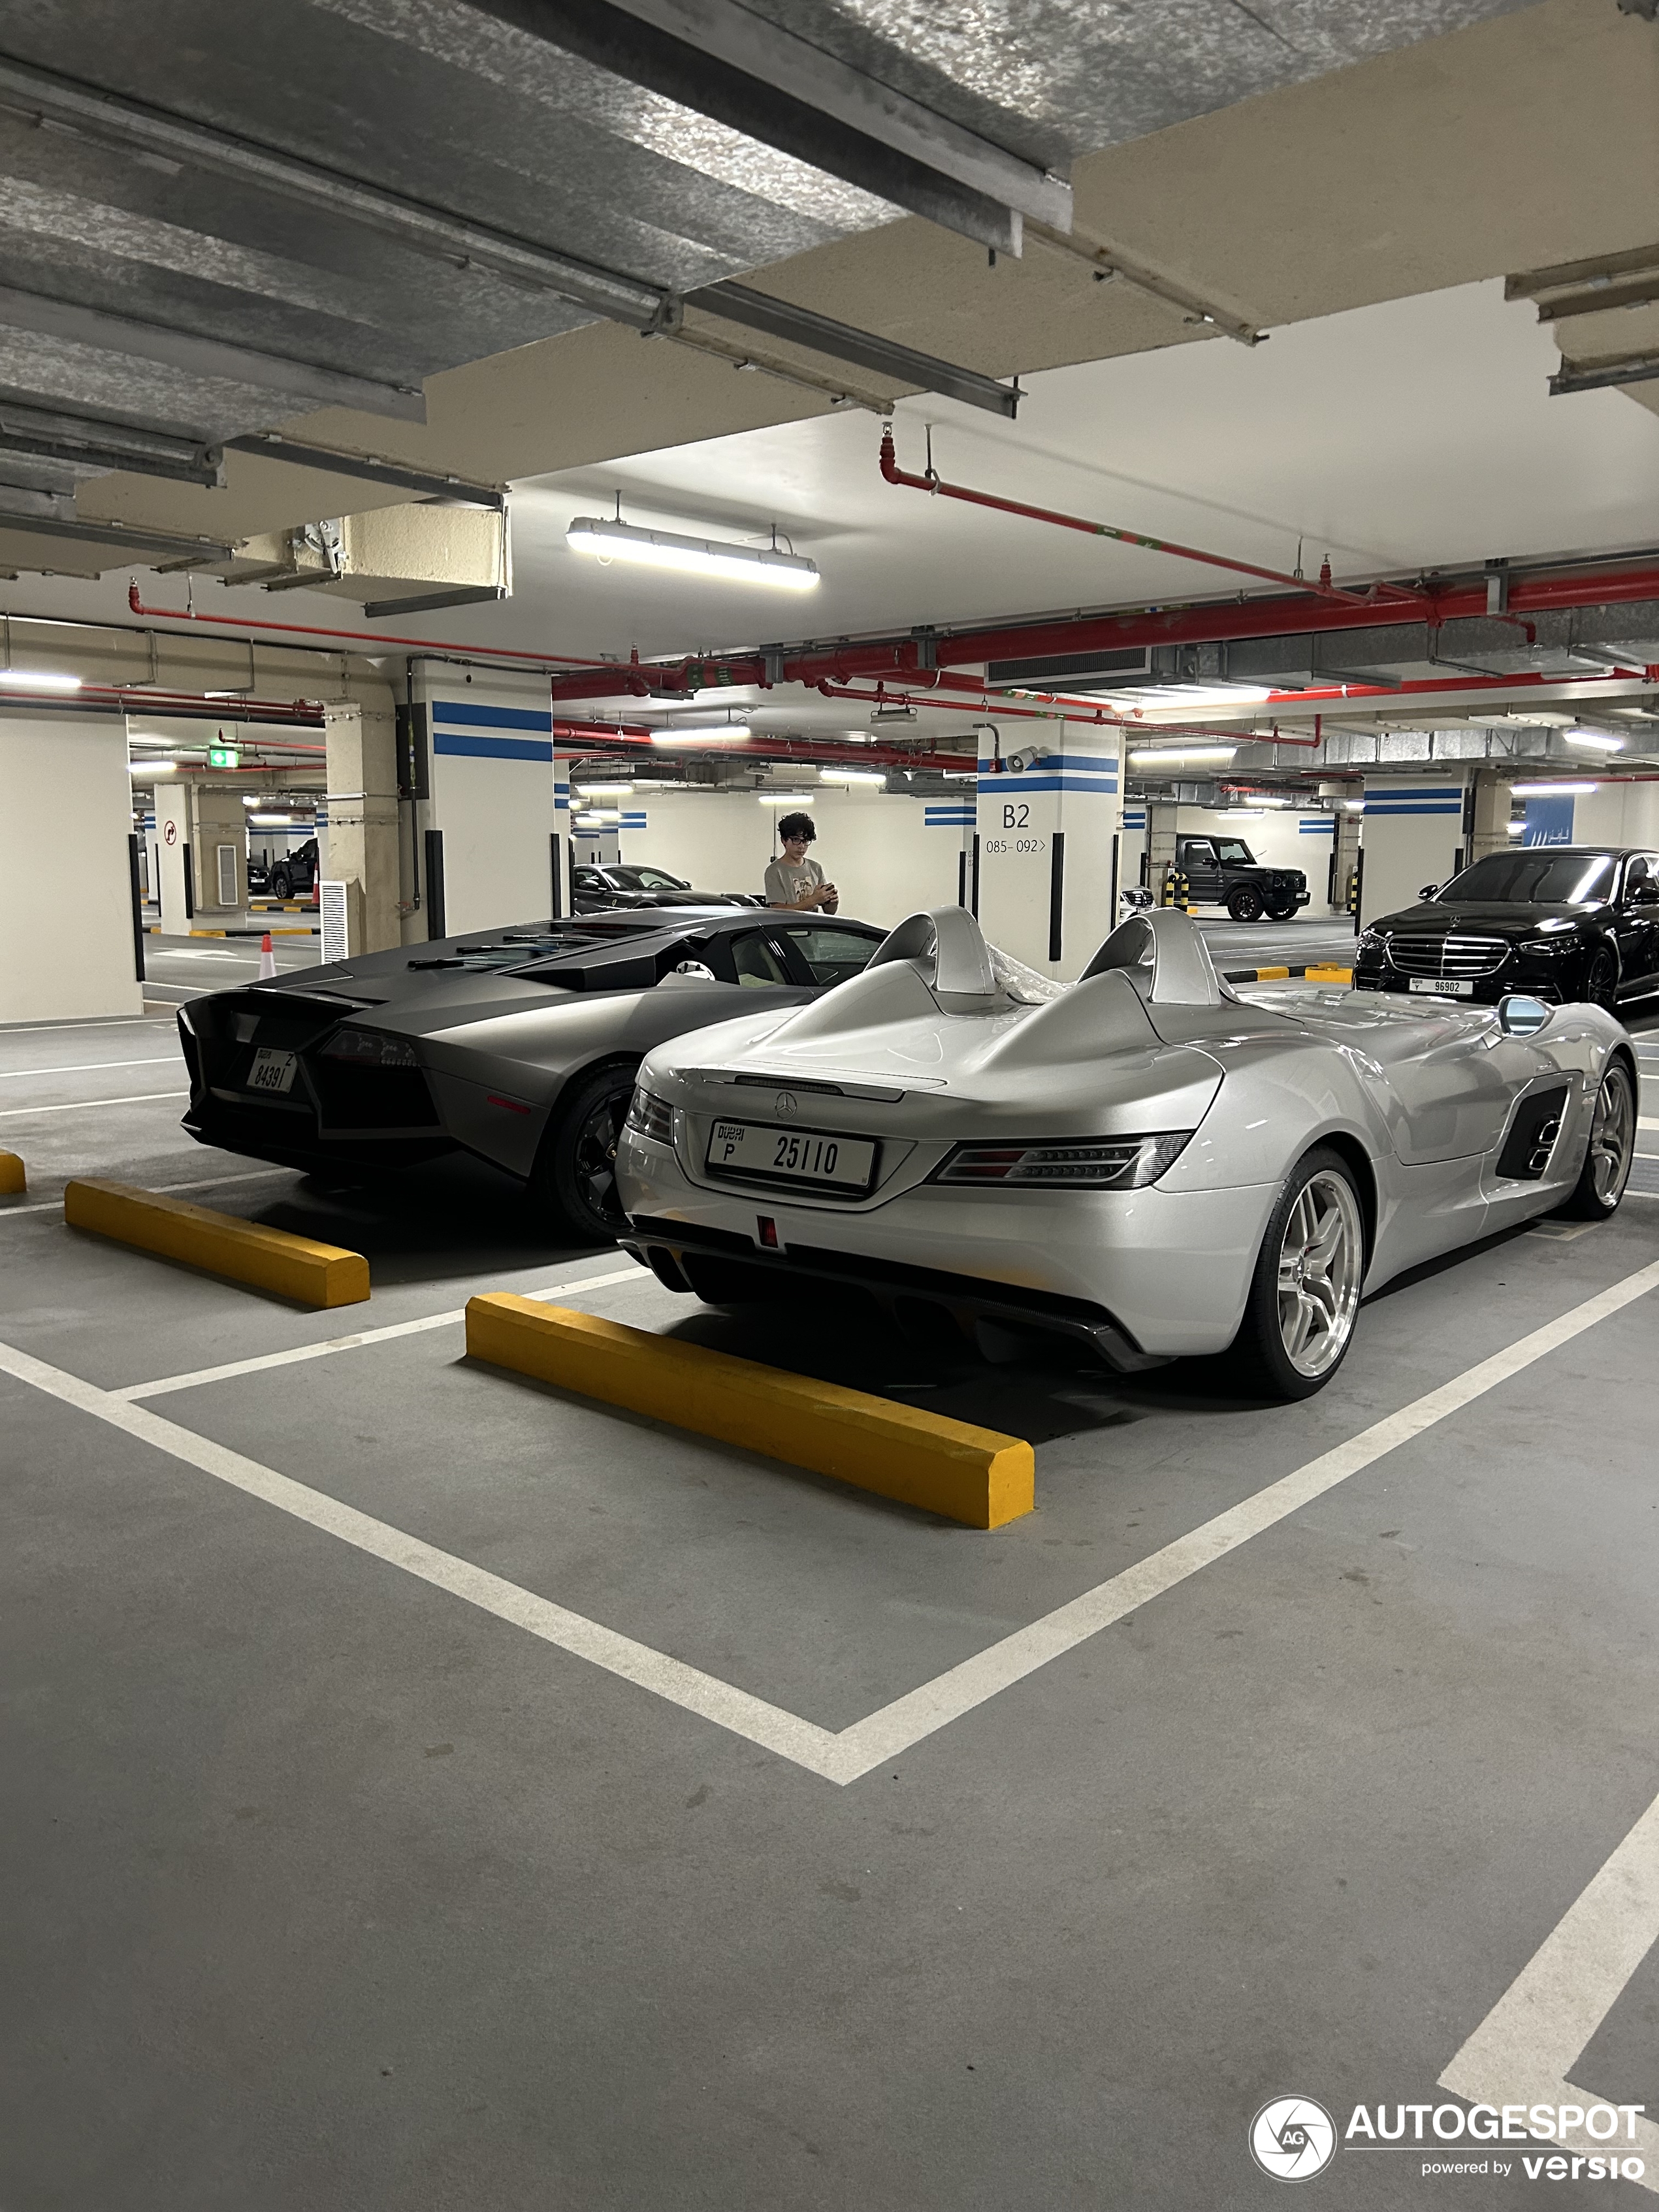 Two legendary cars are standing together in an underground garage in Dubai.